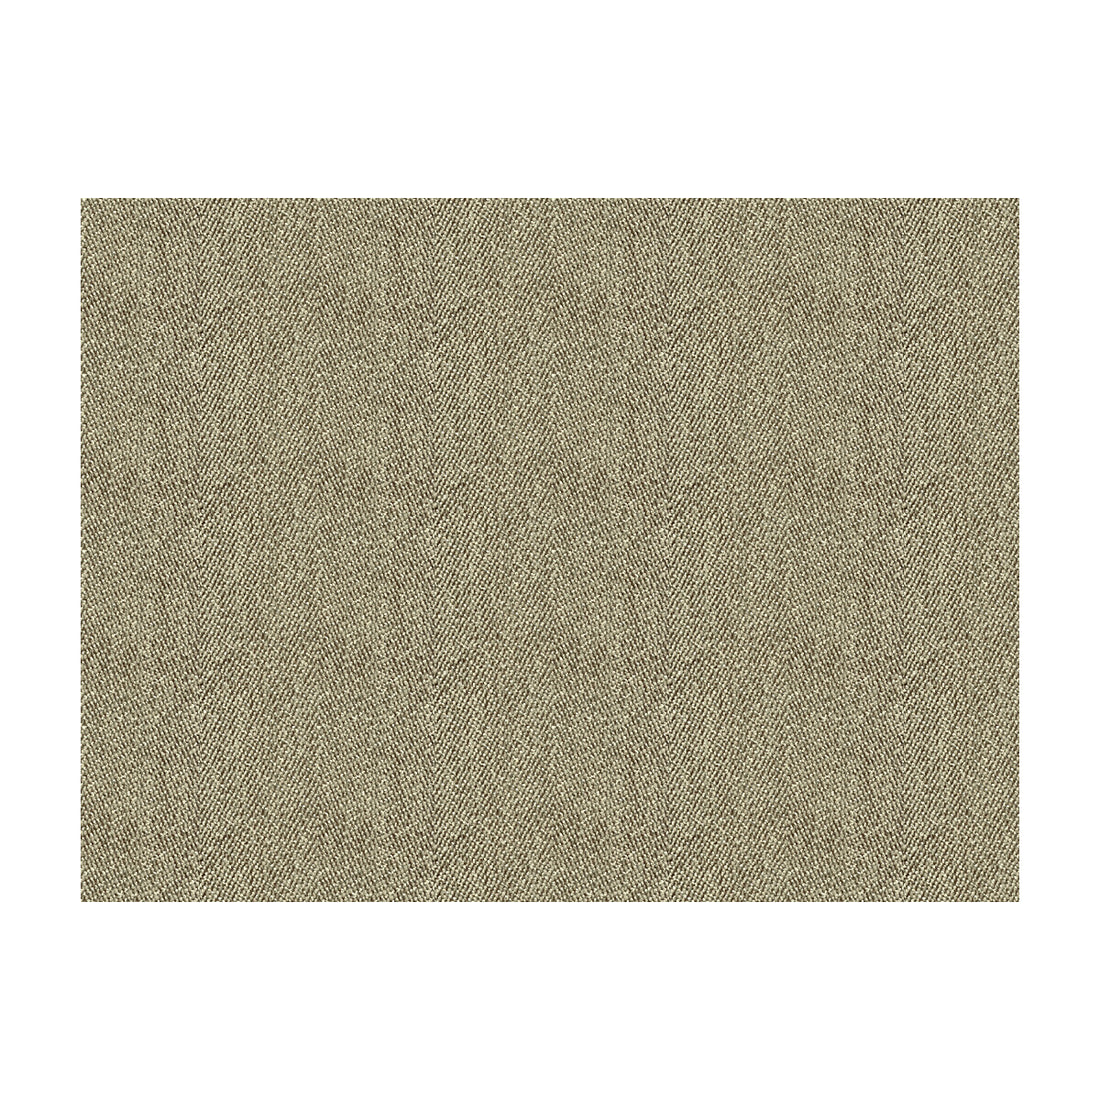 Kravet Smart fabric in 33832-811 color - pattern 33832.811.0 - by Kravet Smart in the Performance Crypton Home collection